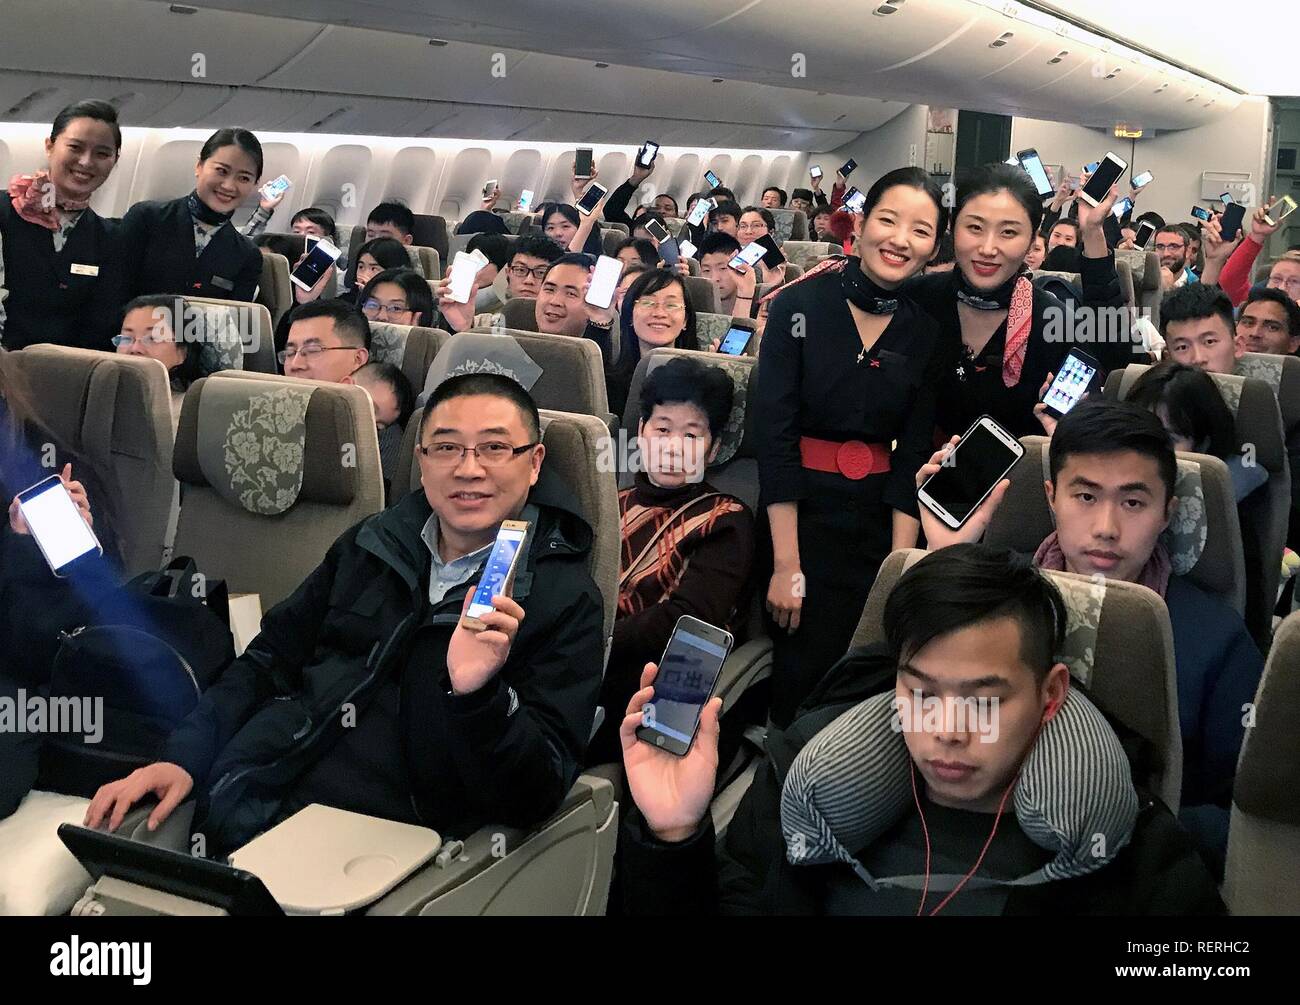 (190123) -- BEIJING, Jan. 23, 2019 (Xinhua) -- Passengers show their mobile phones accessing aviation internet on Flight MU553 of China Eastern Airlines Jan. 18, 2018. China's civil aviation industry is accelerating its advance into the digital era, with major players sending clear signals of new opportunities worldwide. (Xinhua) Stock Photo